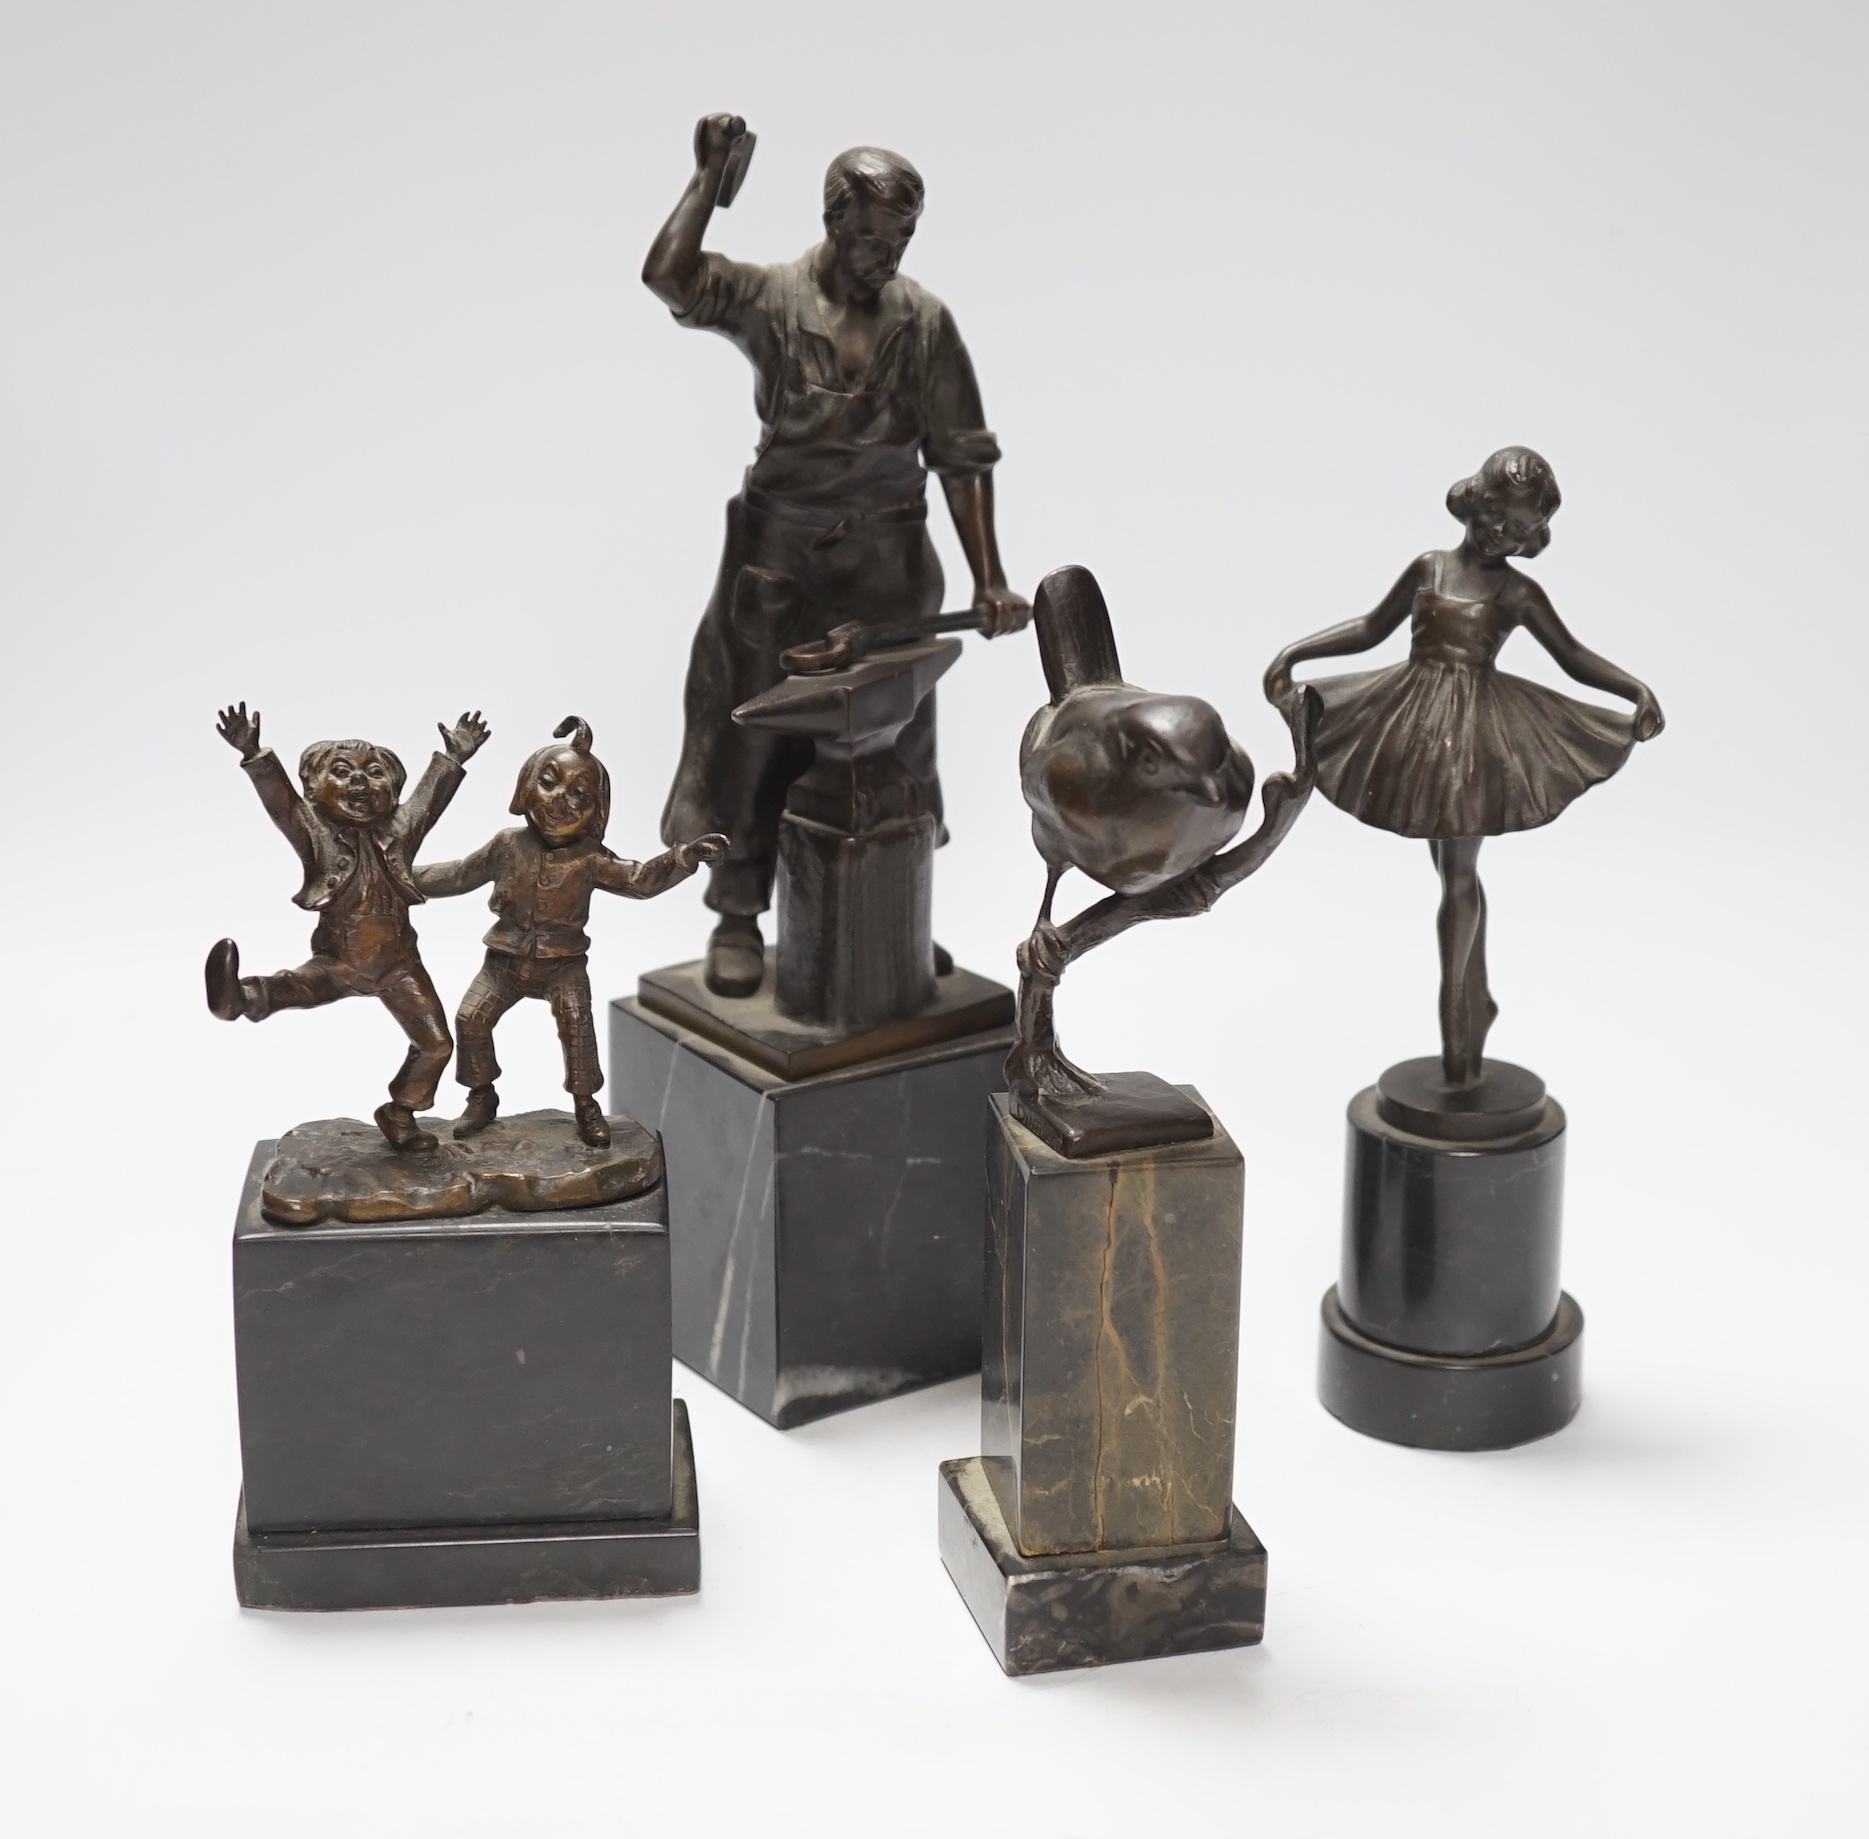 A German bronze of a blacksmith, indistinctly signed, a bronze figure group signed Öbold, a bronze of a Robin, signed K. Reynen and an unsigned bronze of a ballerina, all on marble bases, tallest 27cm (4)